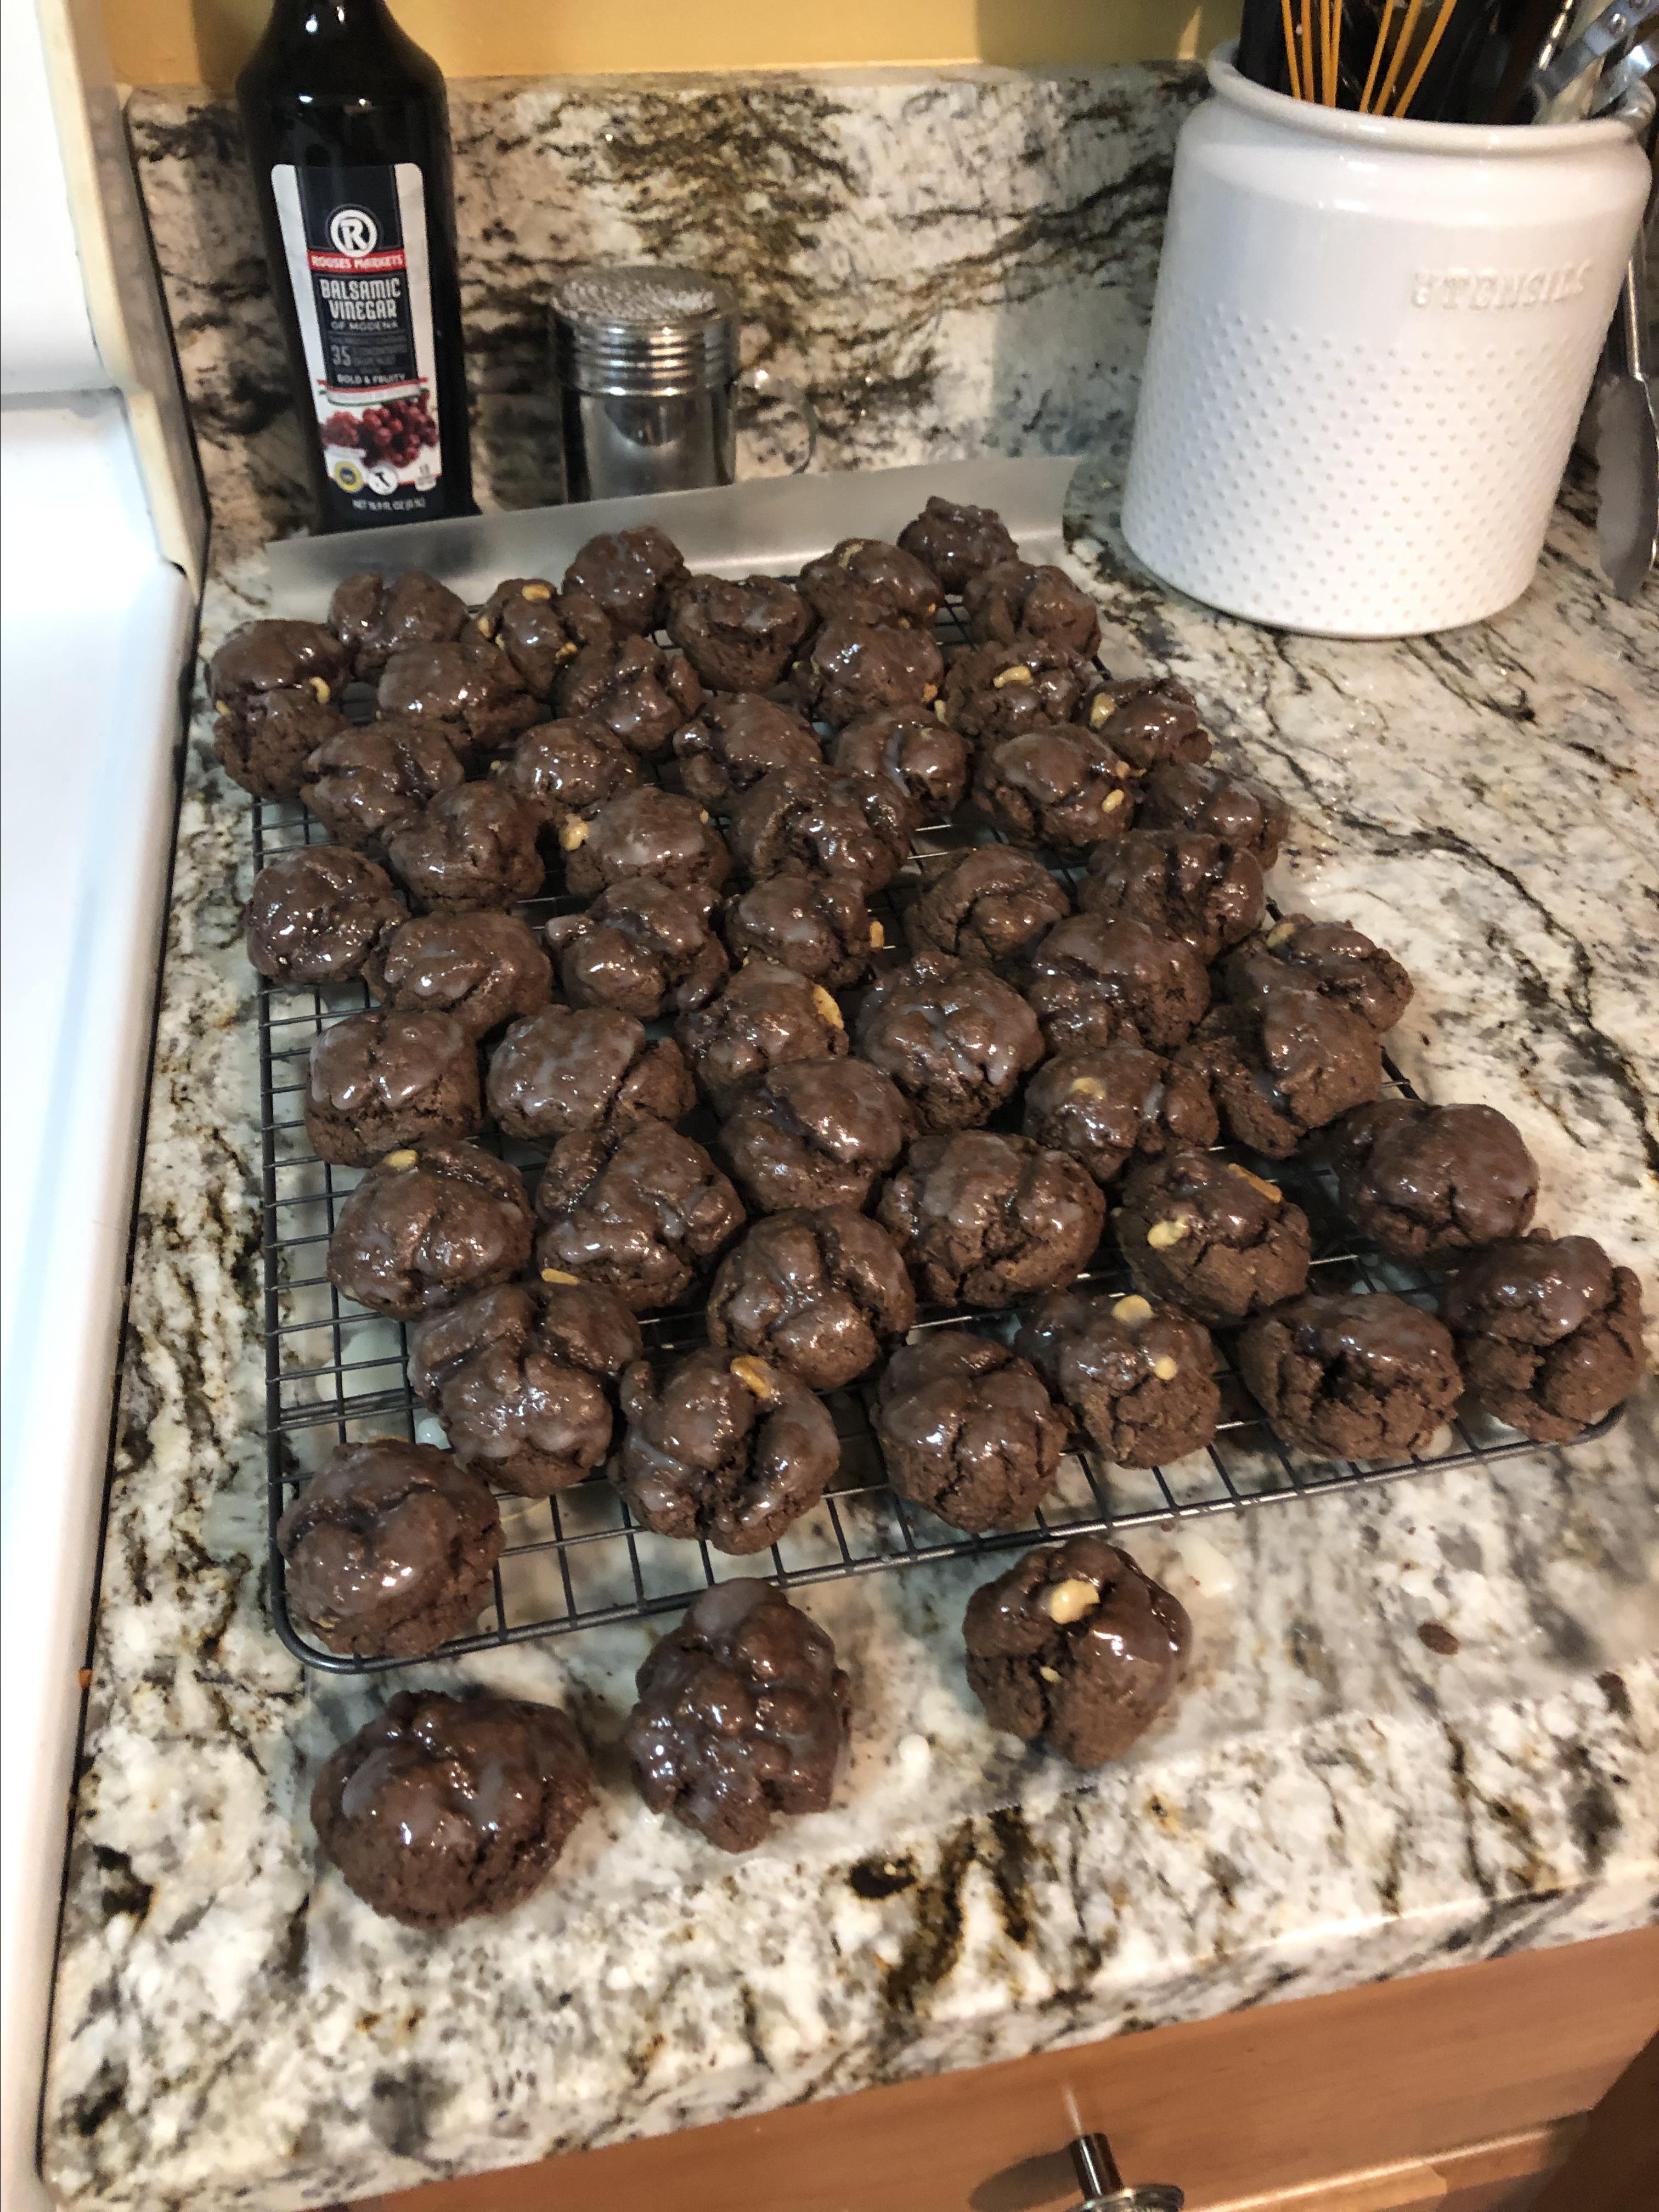 Italian Frosted Chocolate Cookies